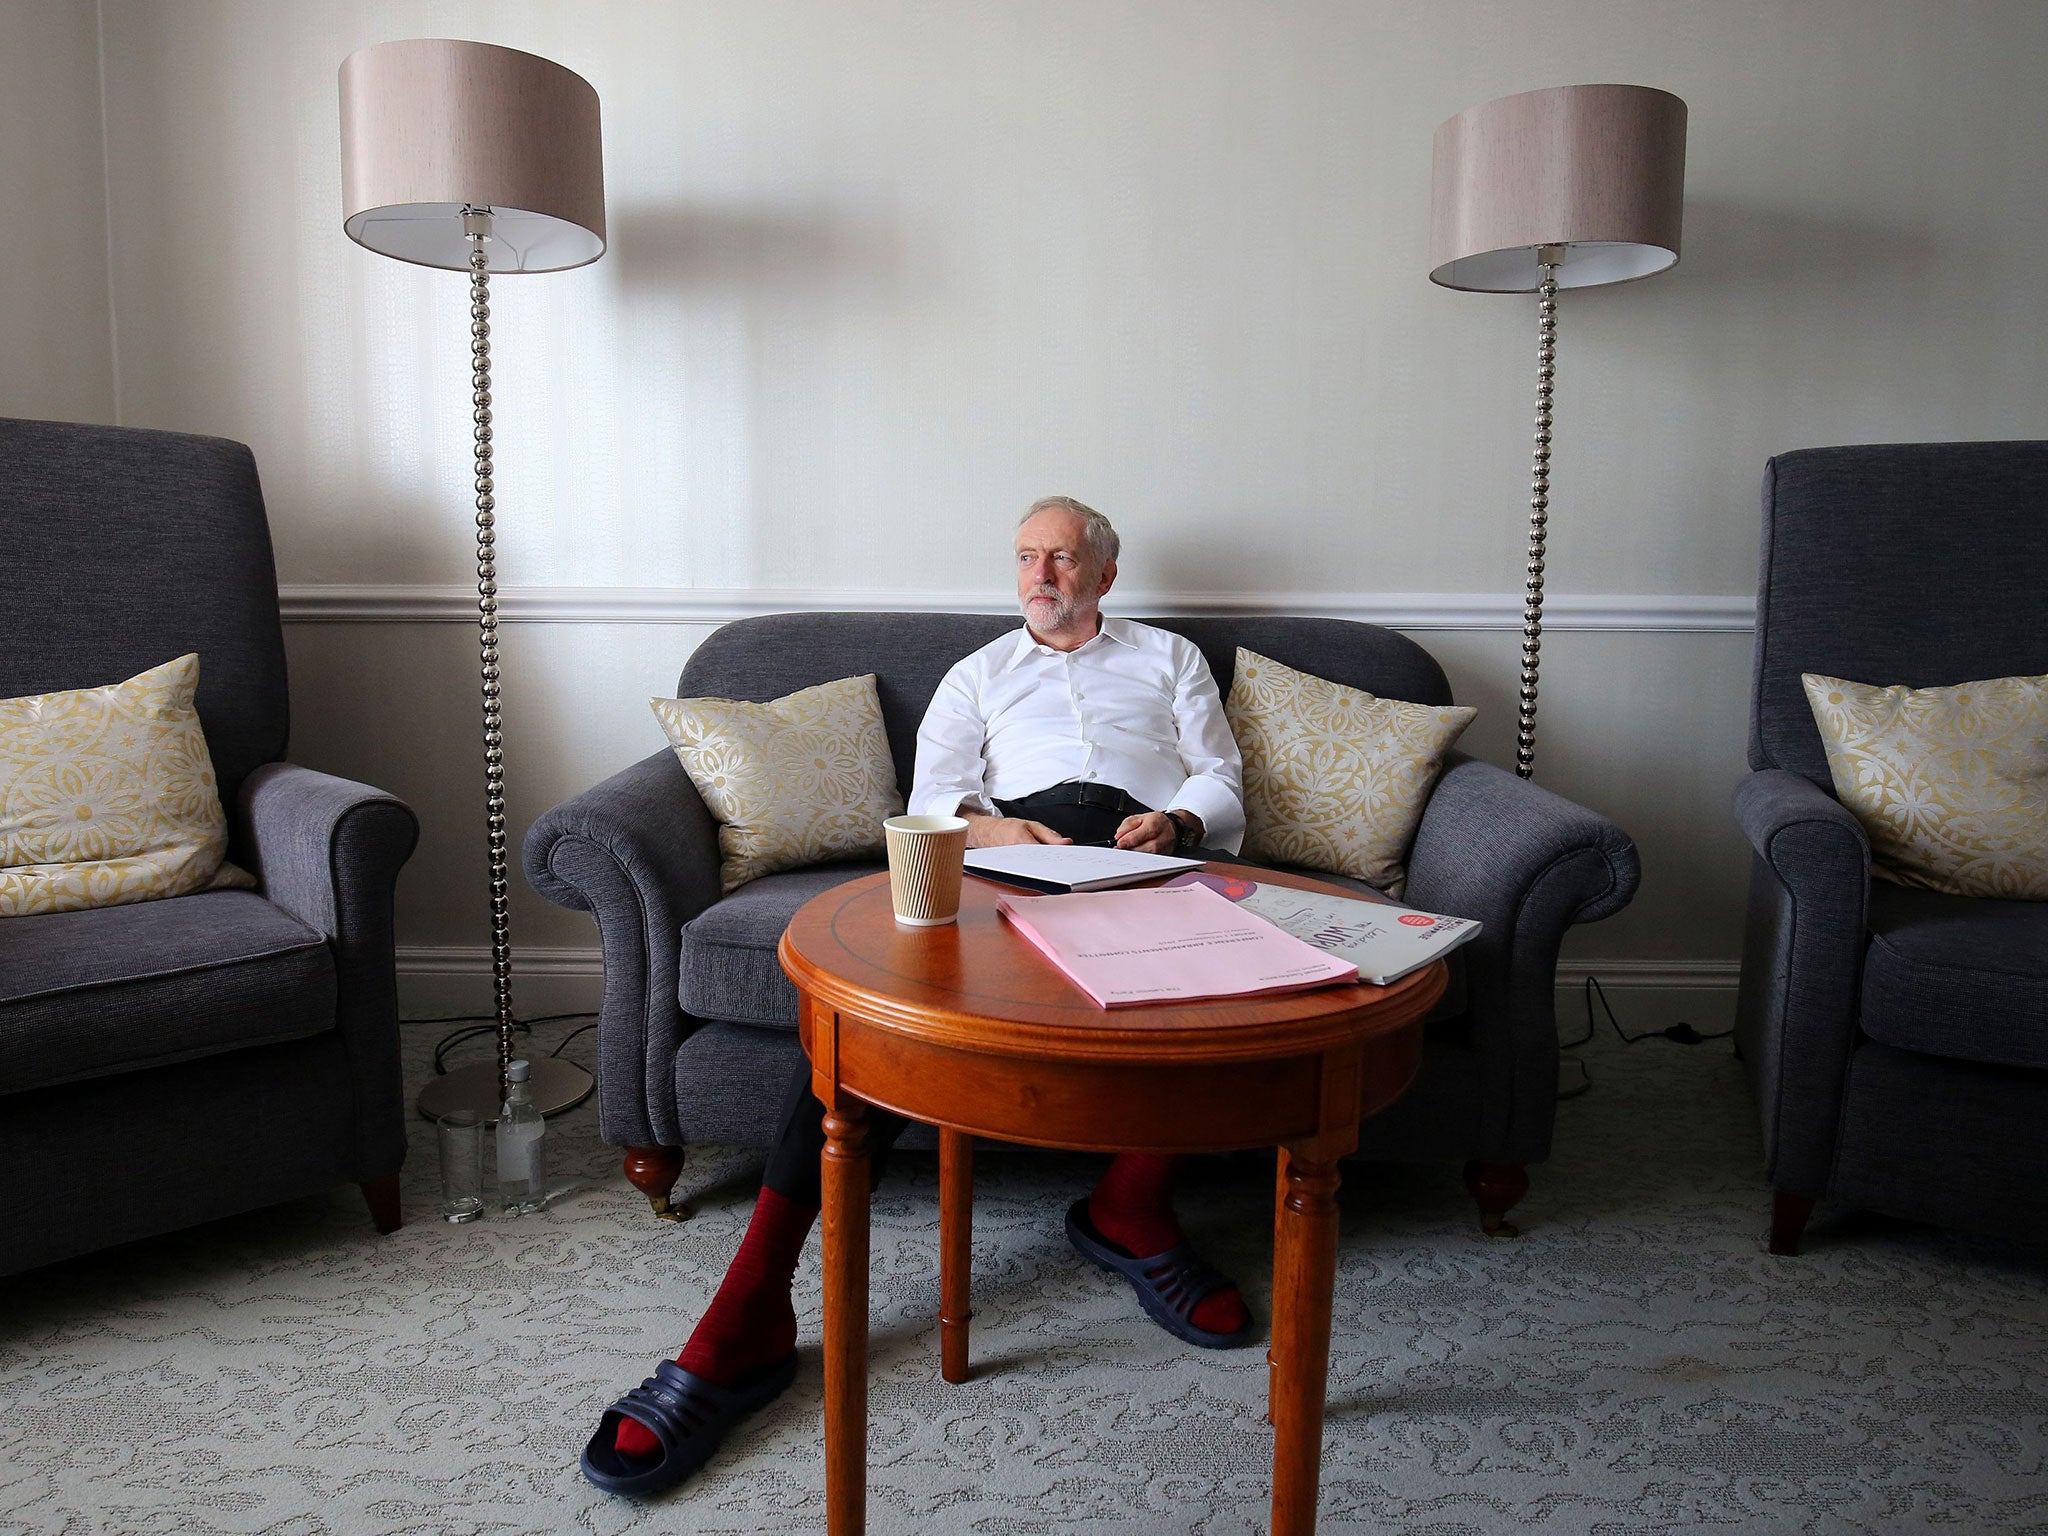 Labour Party Leader Jeremy Corbyn prepares for his first leader's speech in his hotel room in Brighton